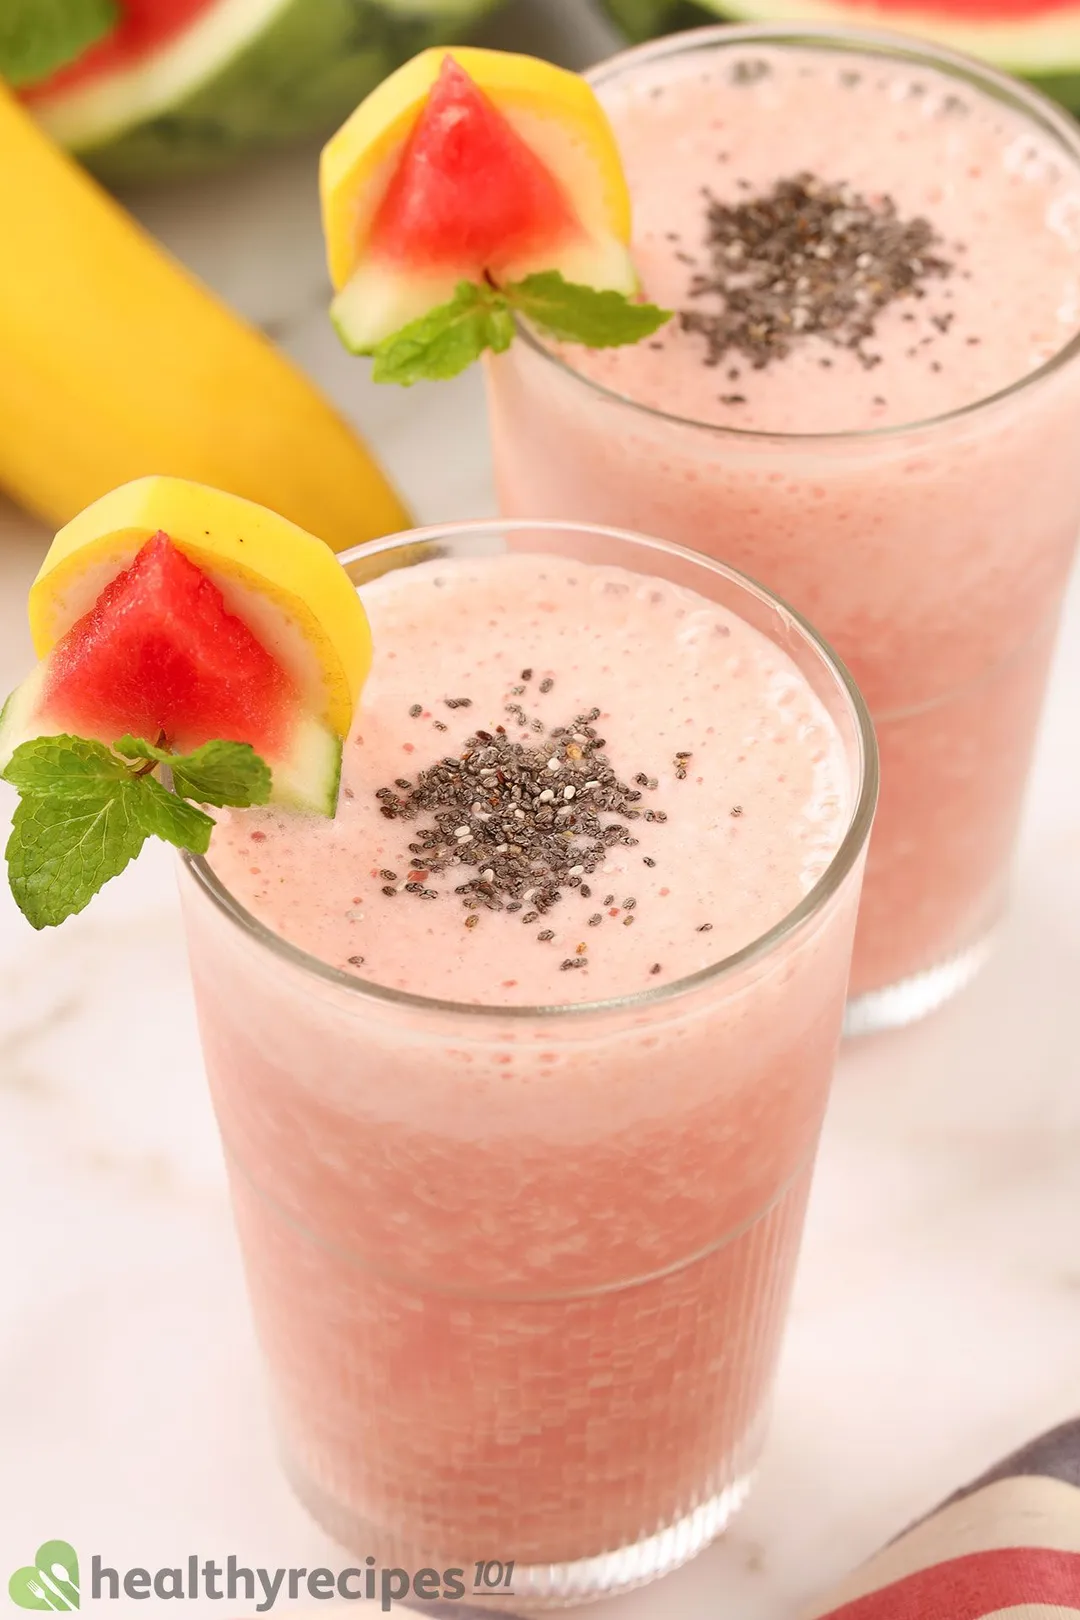 Two glasses of Watermelon Banana Smoothie garnished with chia seeds, mint leaves, a small watermelon wedge, and a piece of banana.